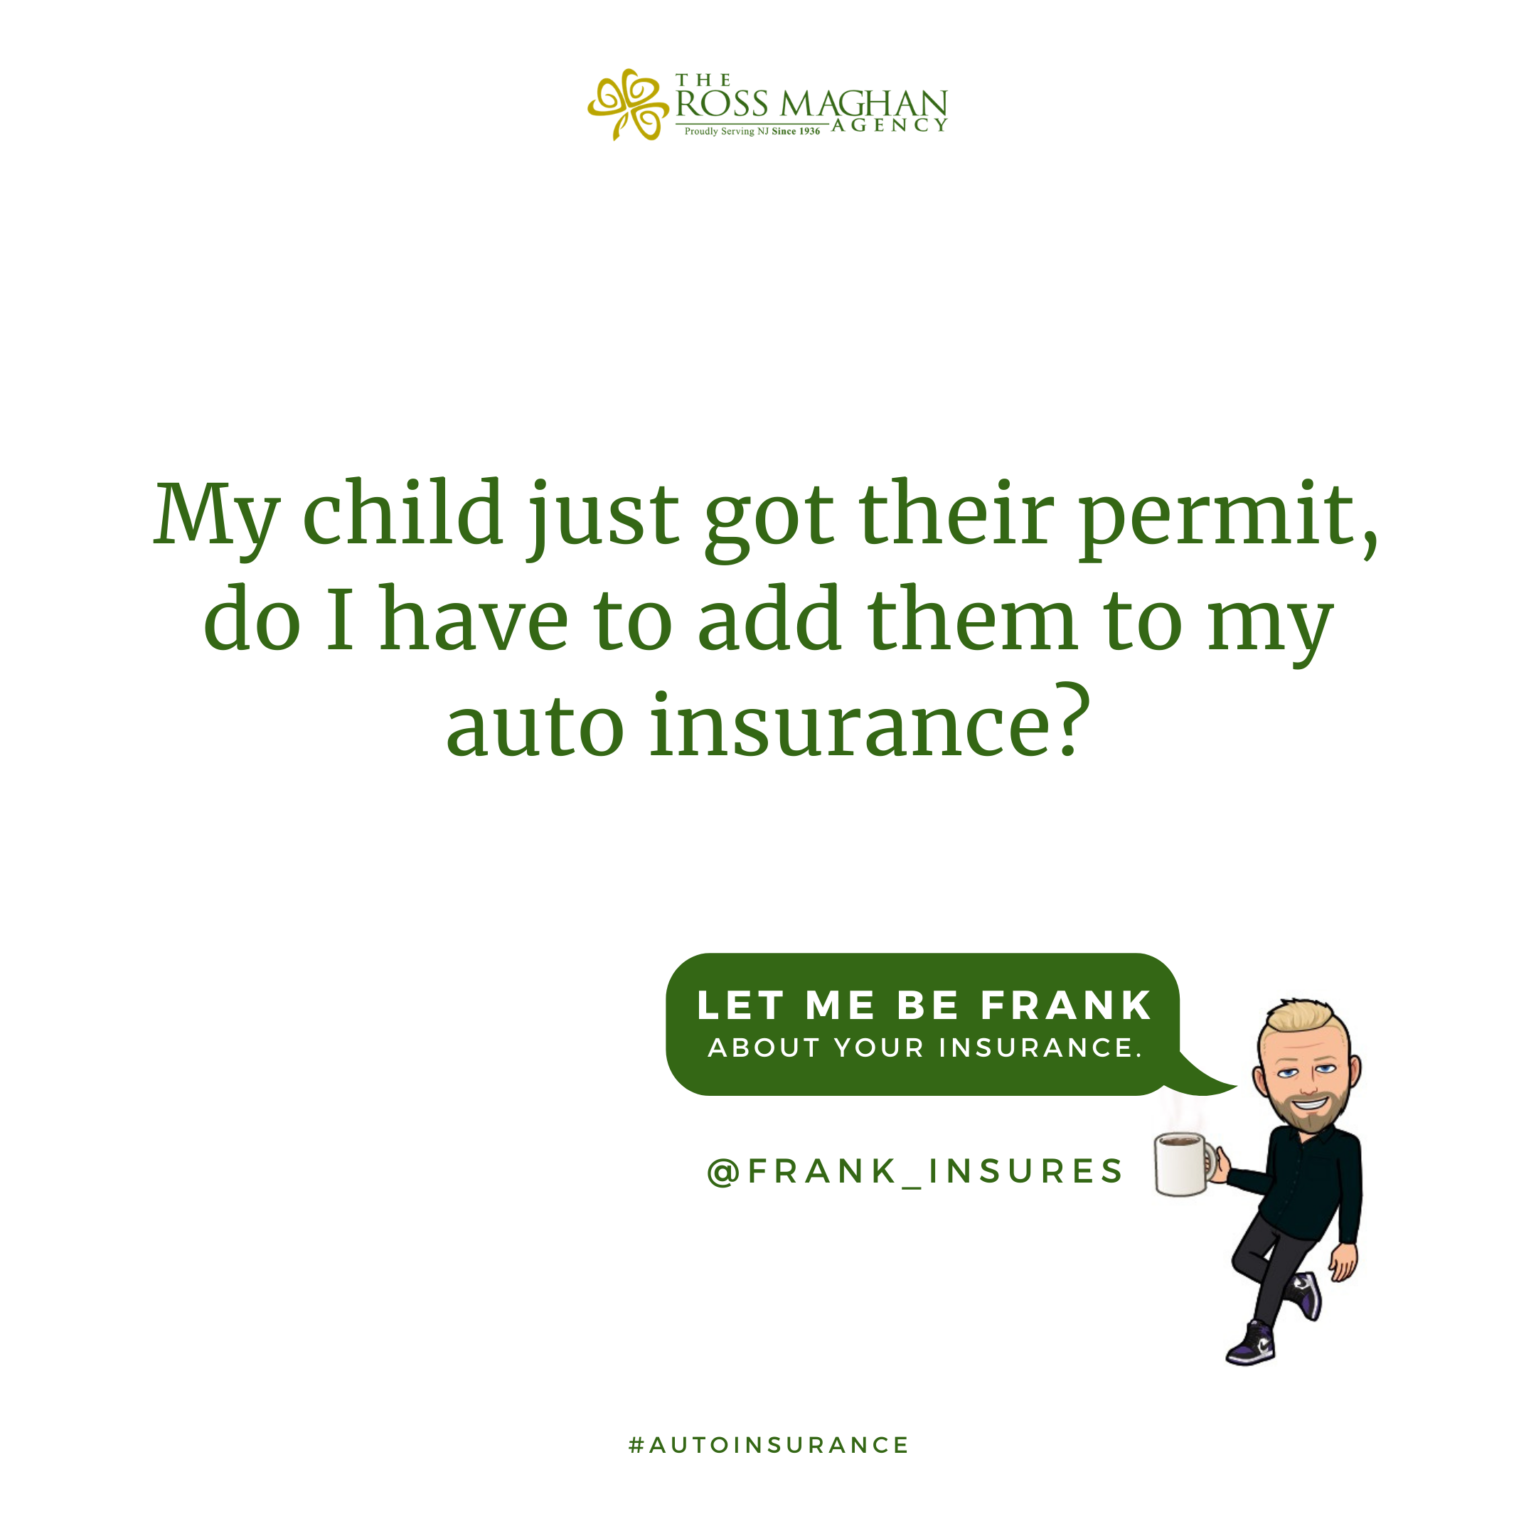 my-child-just-got-their-permit-do-i-have-to-add-them-to-my-auto